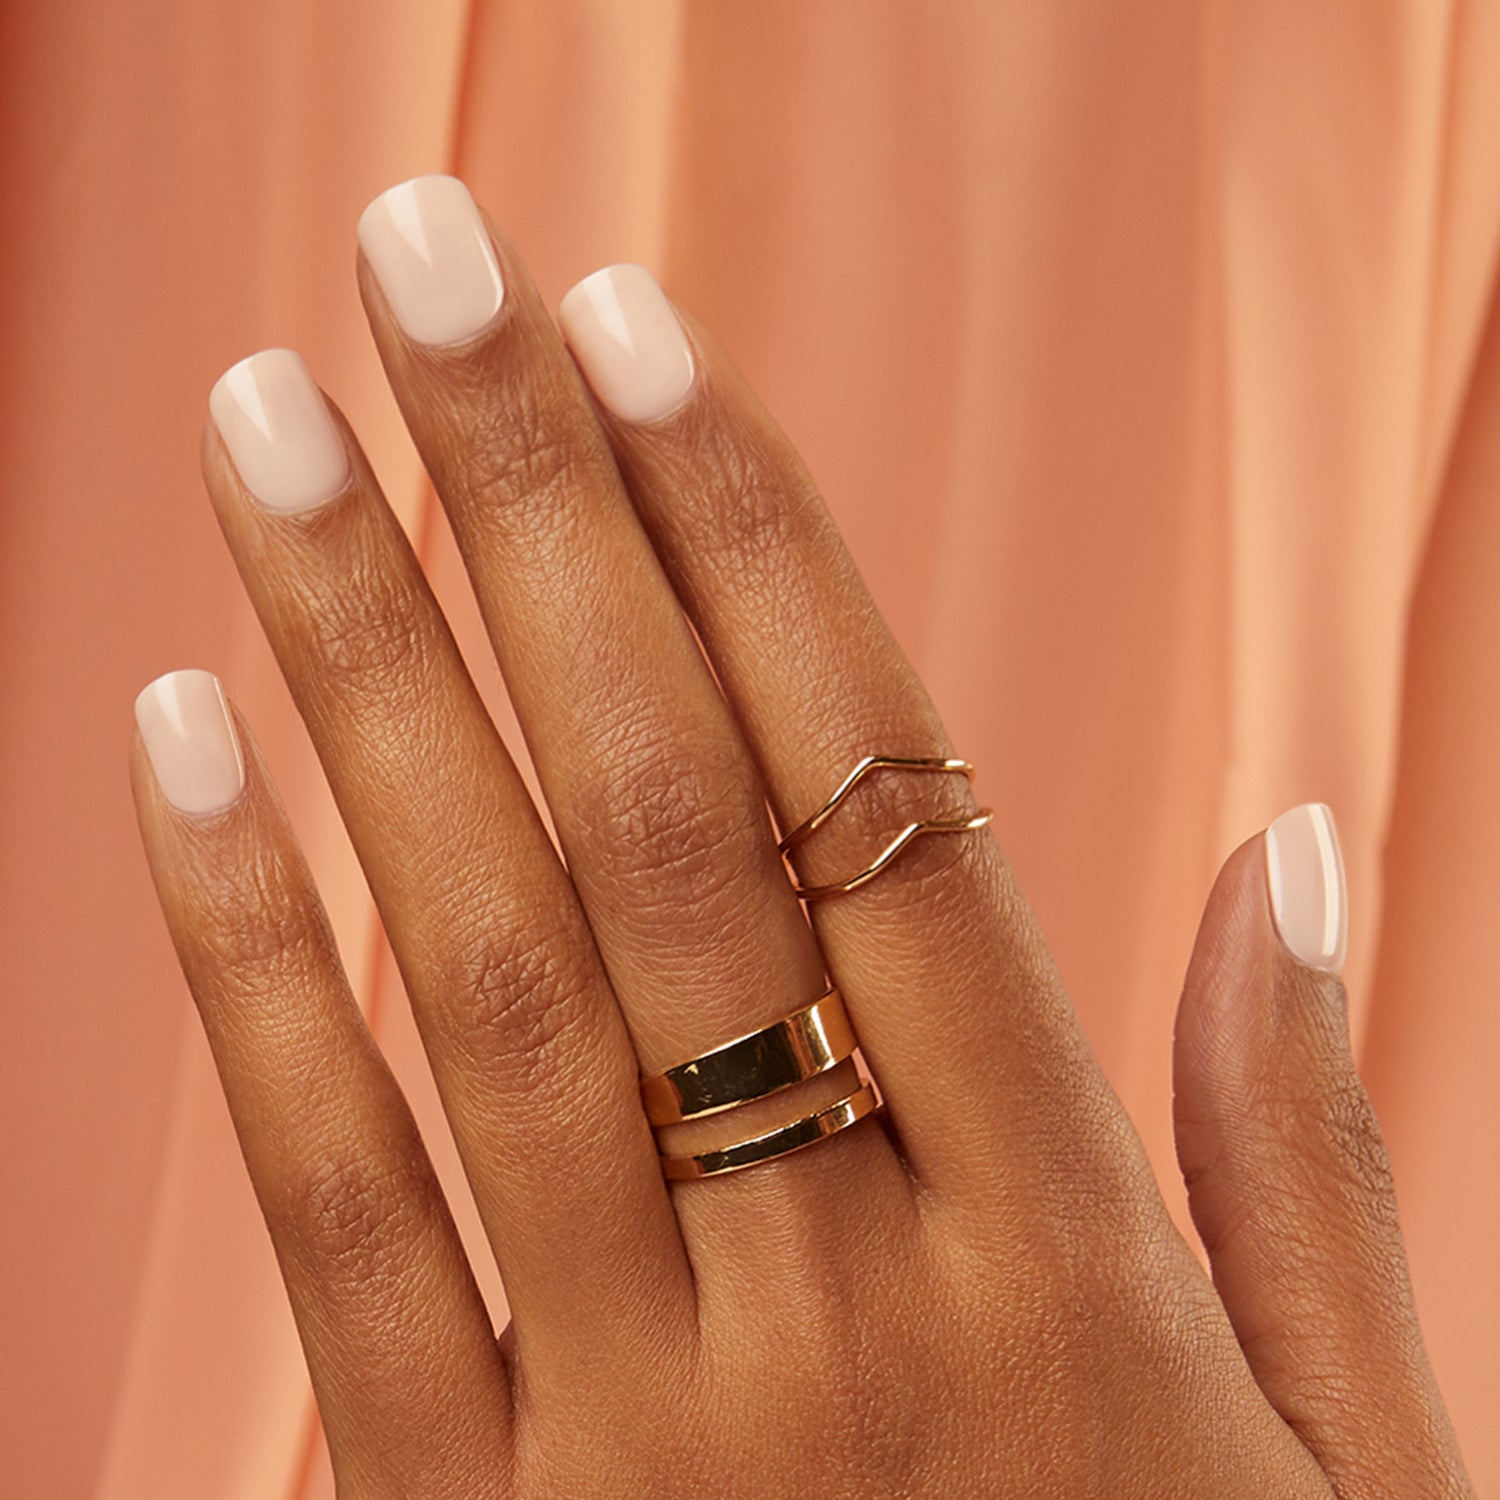 Short length, square shape, glossy finish. Cream press-on gel nails featuring a subtle ombré with a clear base.